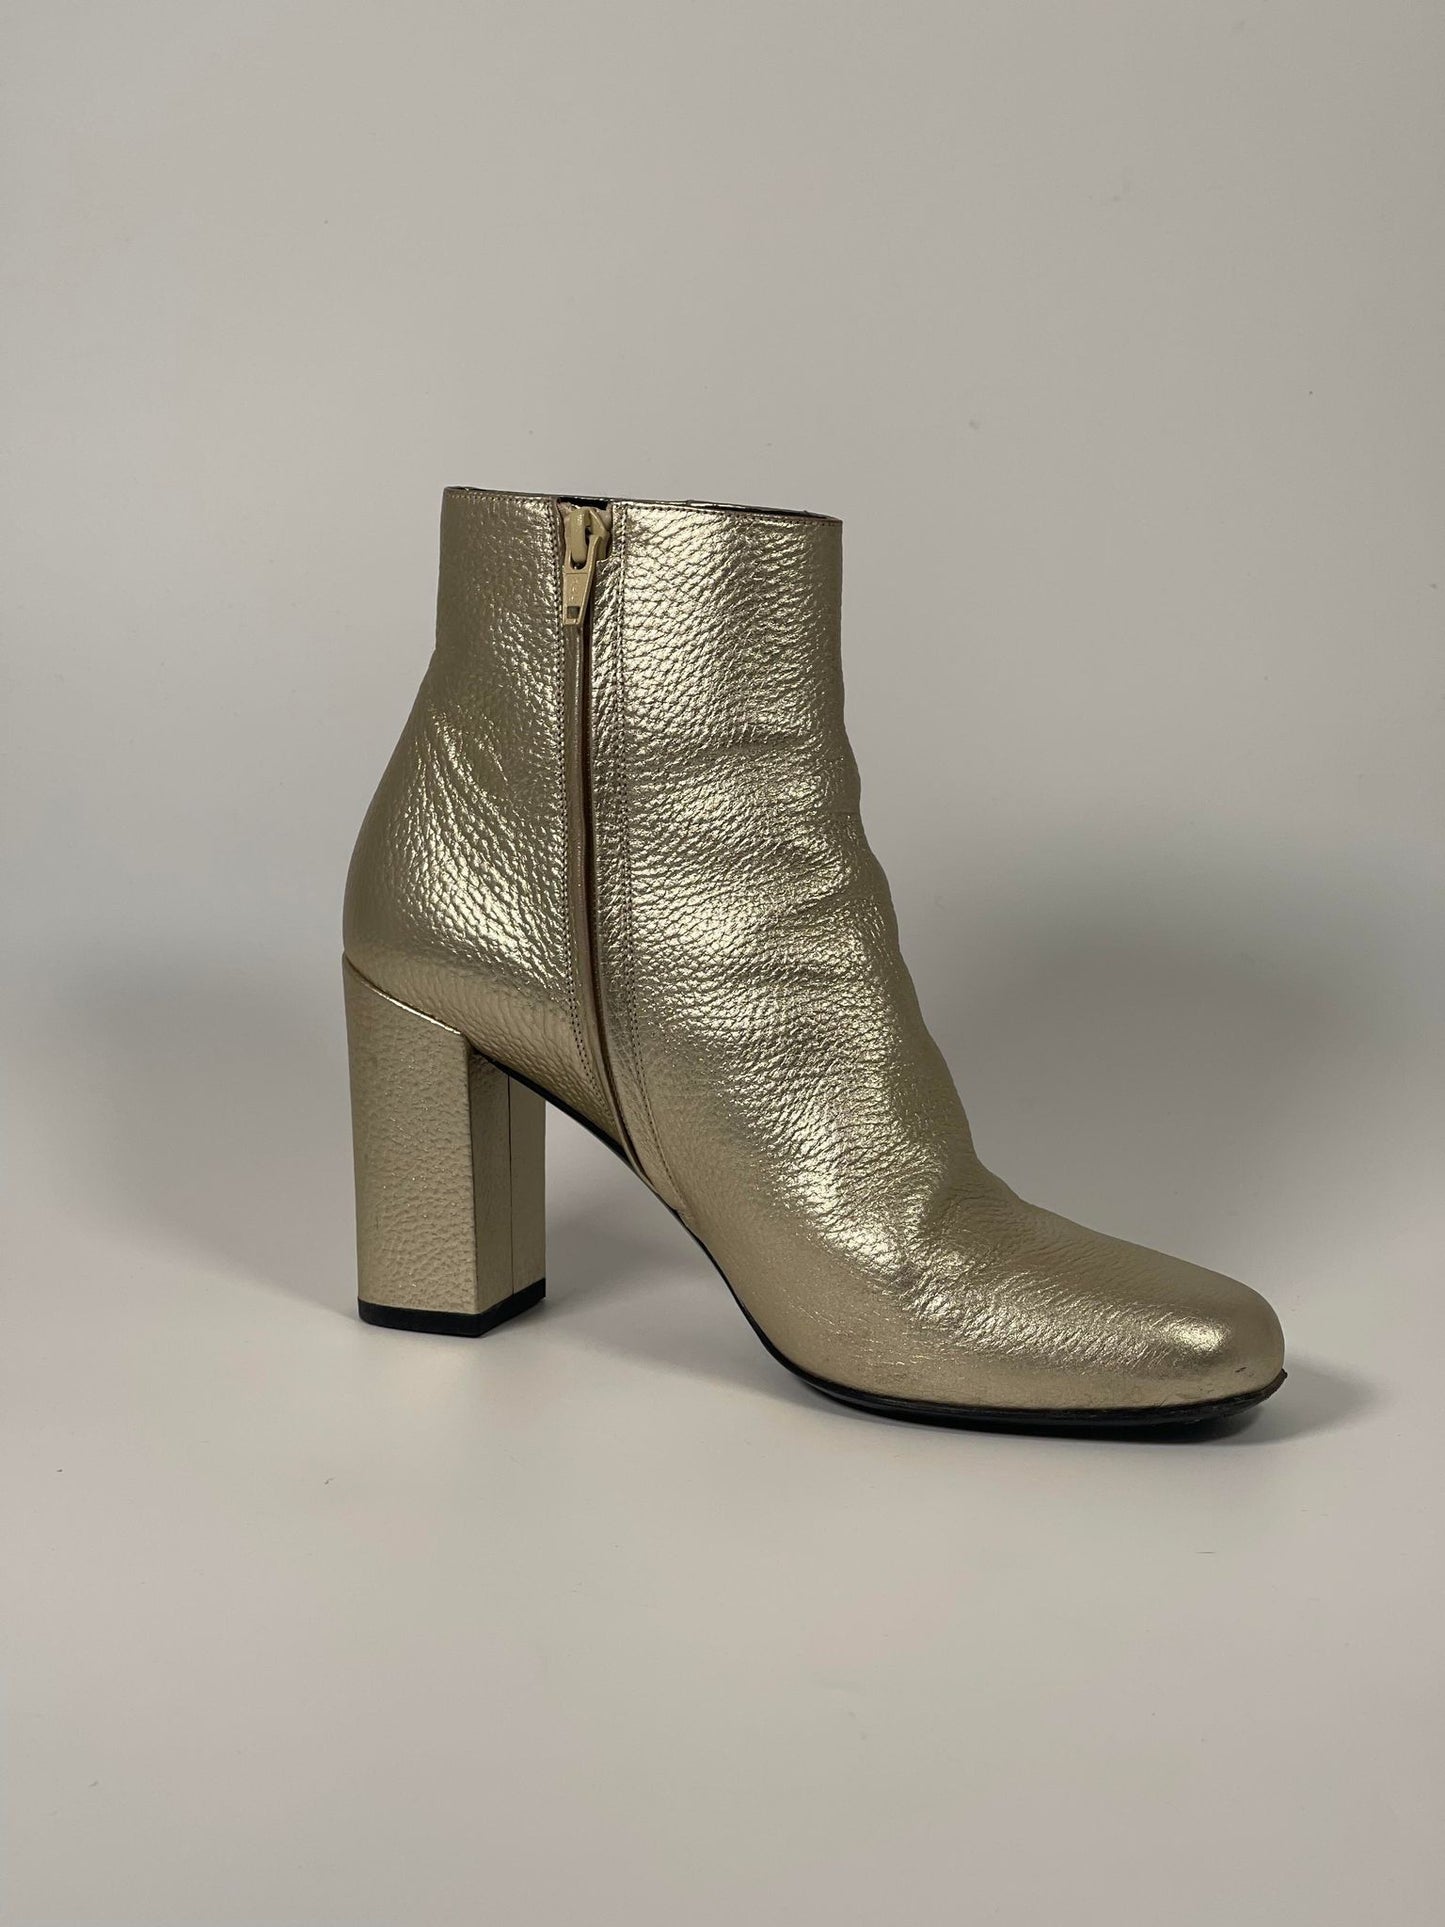 YSL Gold Lou 95 Ankle Boots (Size 39.5)